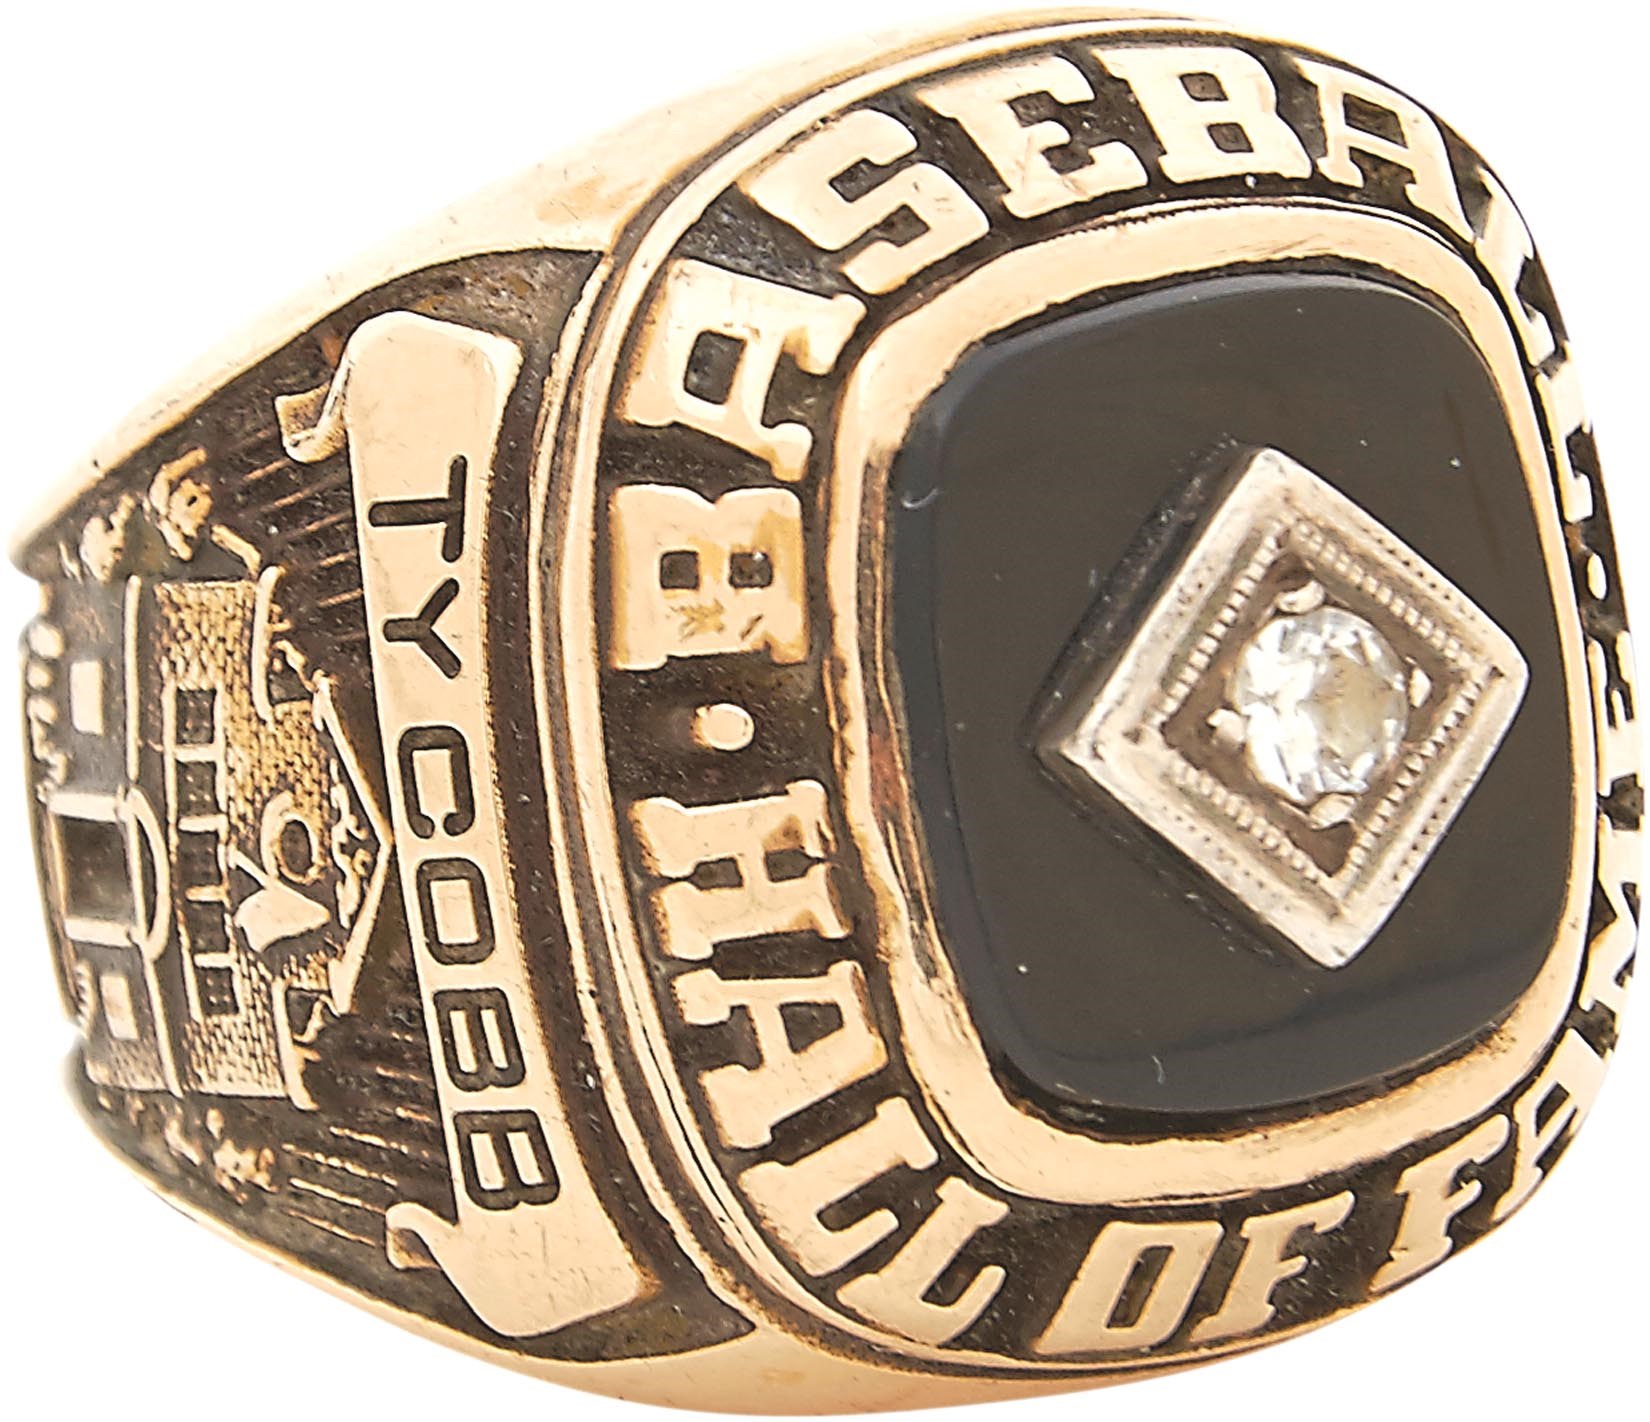 Sports Rings And Awards - Ty Cobb National Baseball Hall of Fame Salesman's Sample Ring